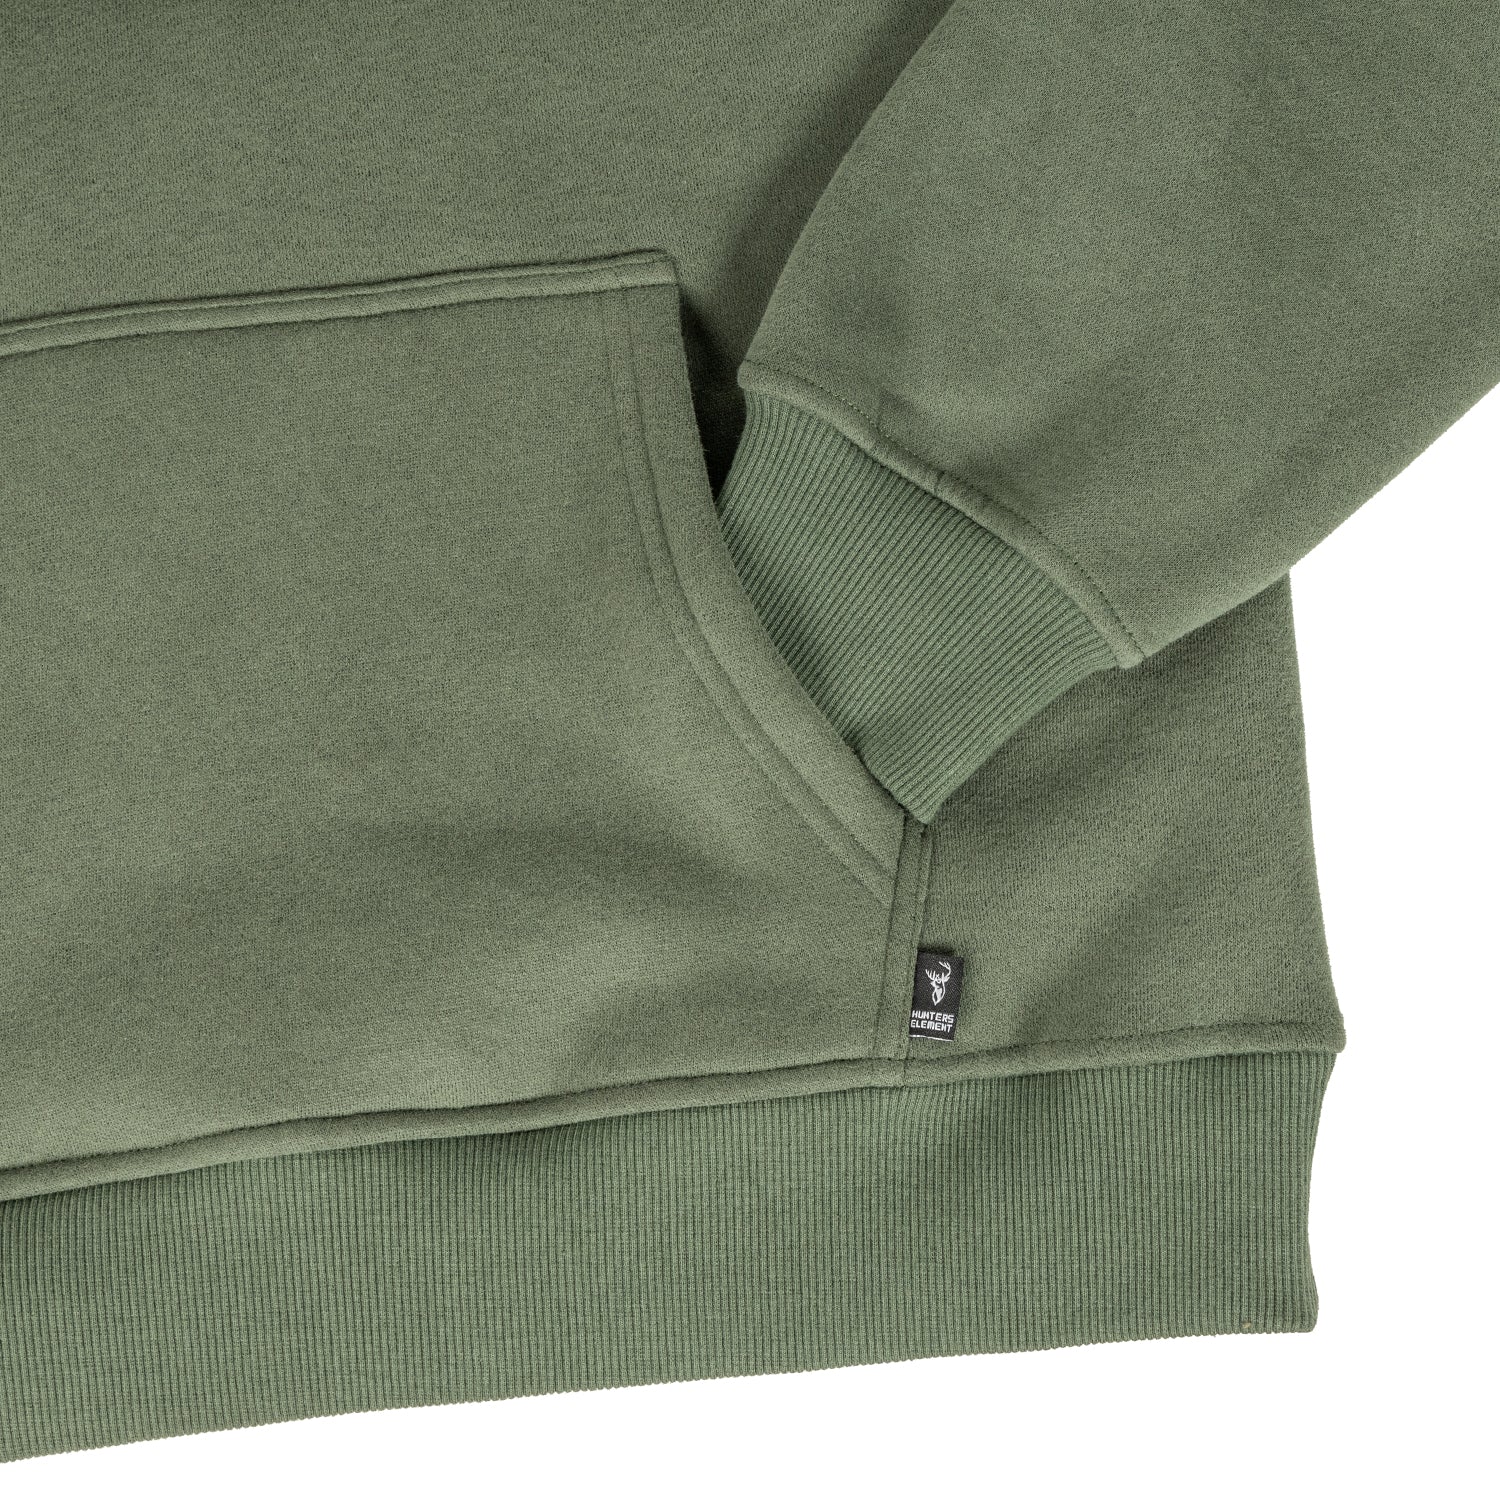 Hunters Element Classic Hoodie -  - Mansfield Hunting & Fishing - Products to prepare for Corona Virus